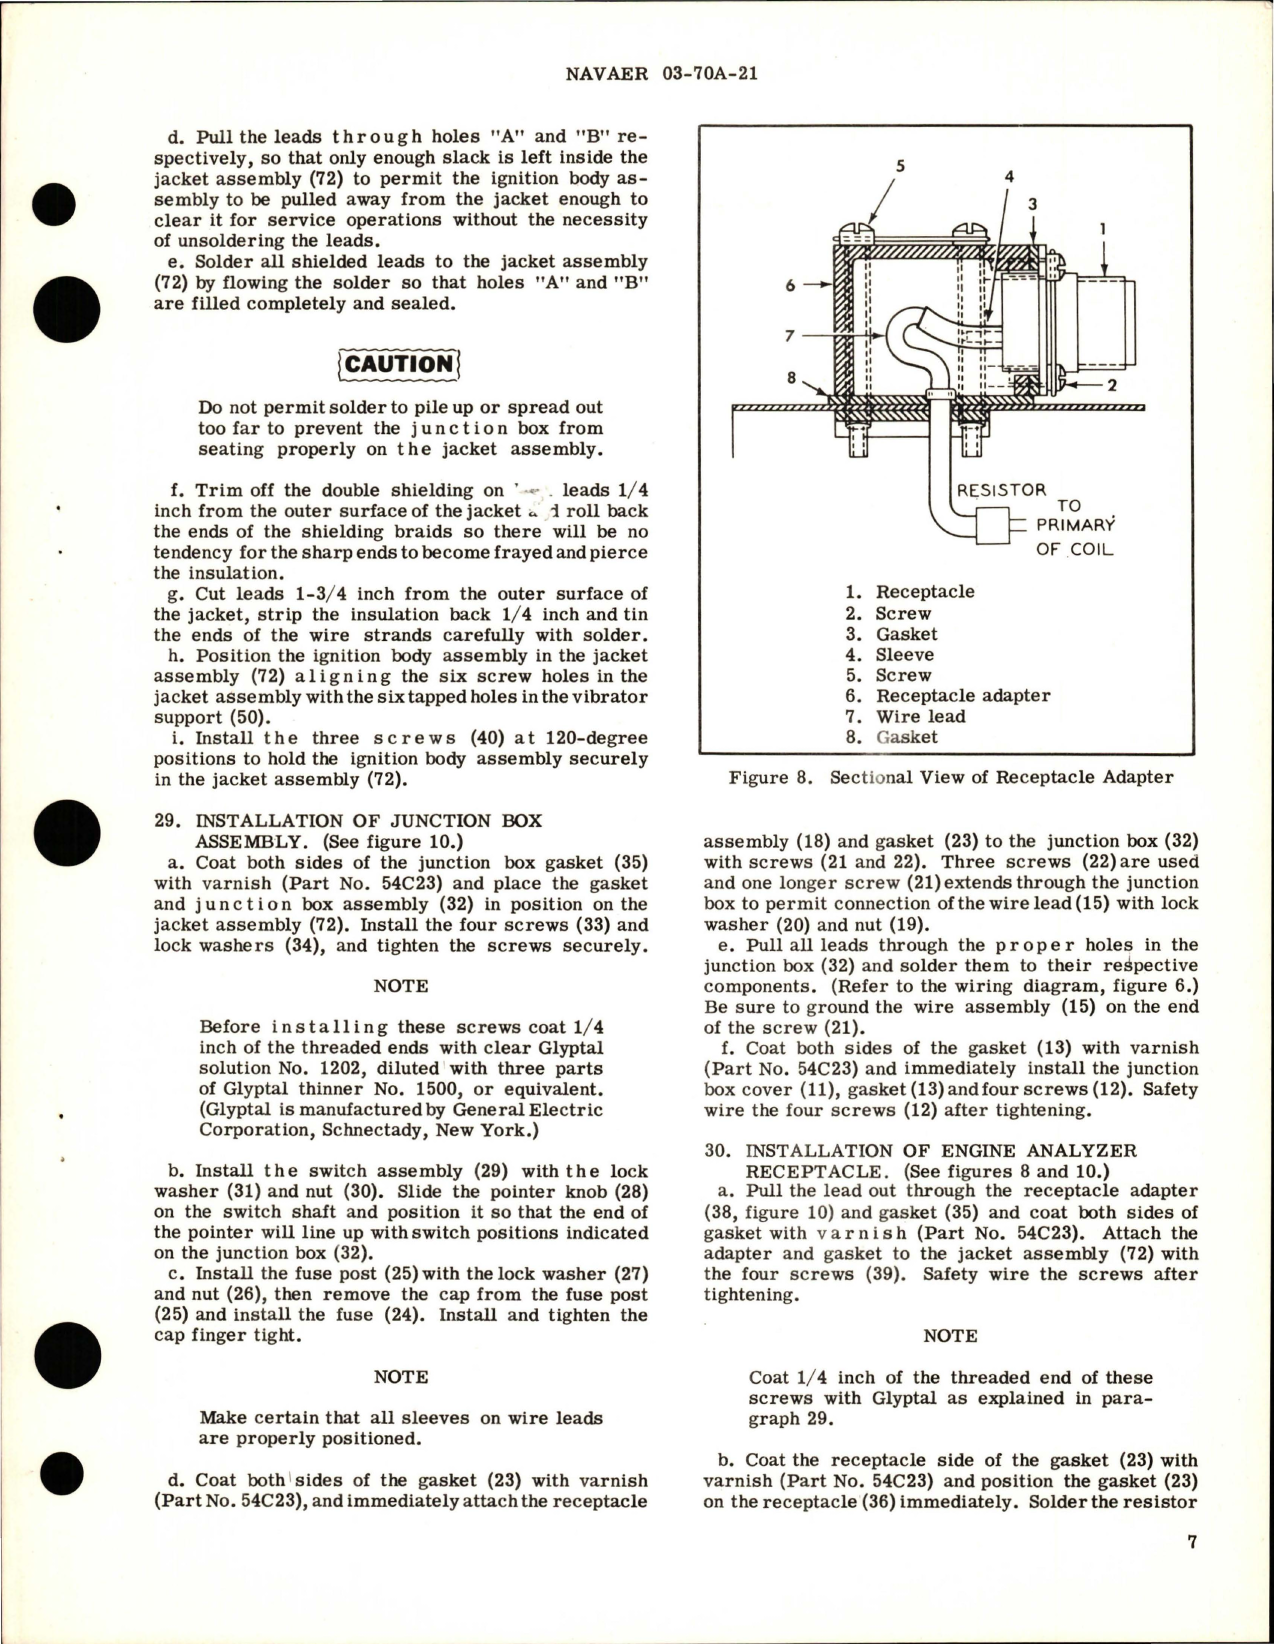 Sample page 7 from AirCorps Library document: Overhaul Instructions with Parts Breakdown for Ignition Unit - Part B11C30 